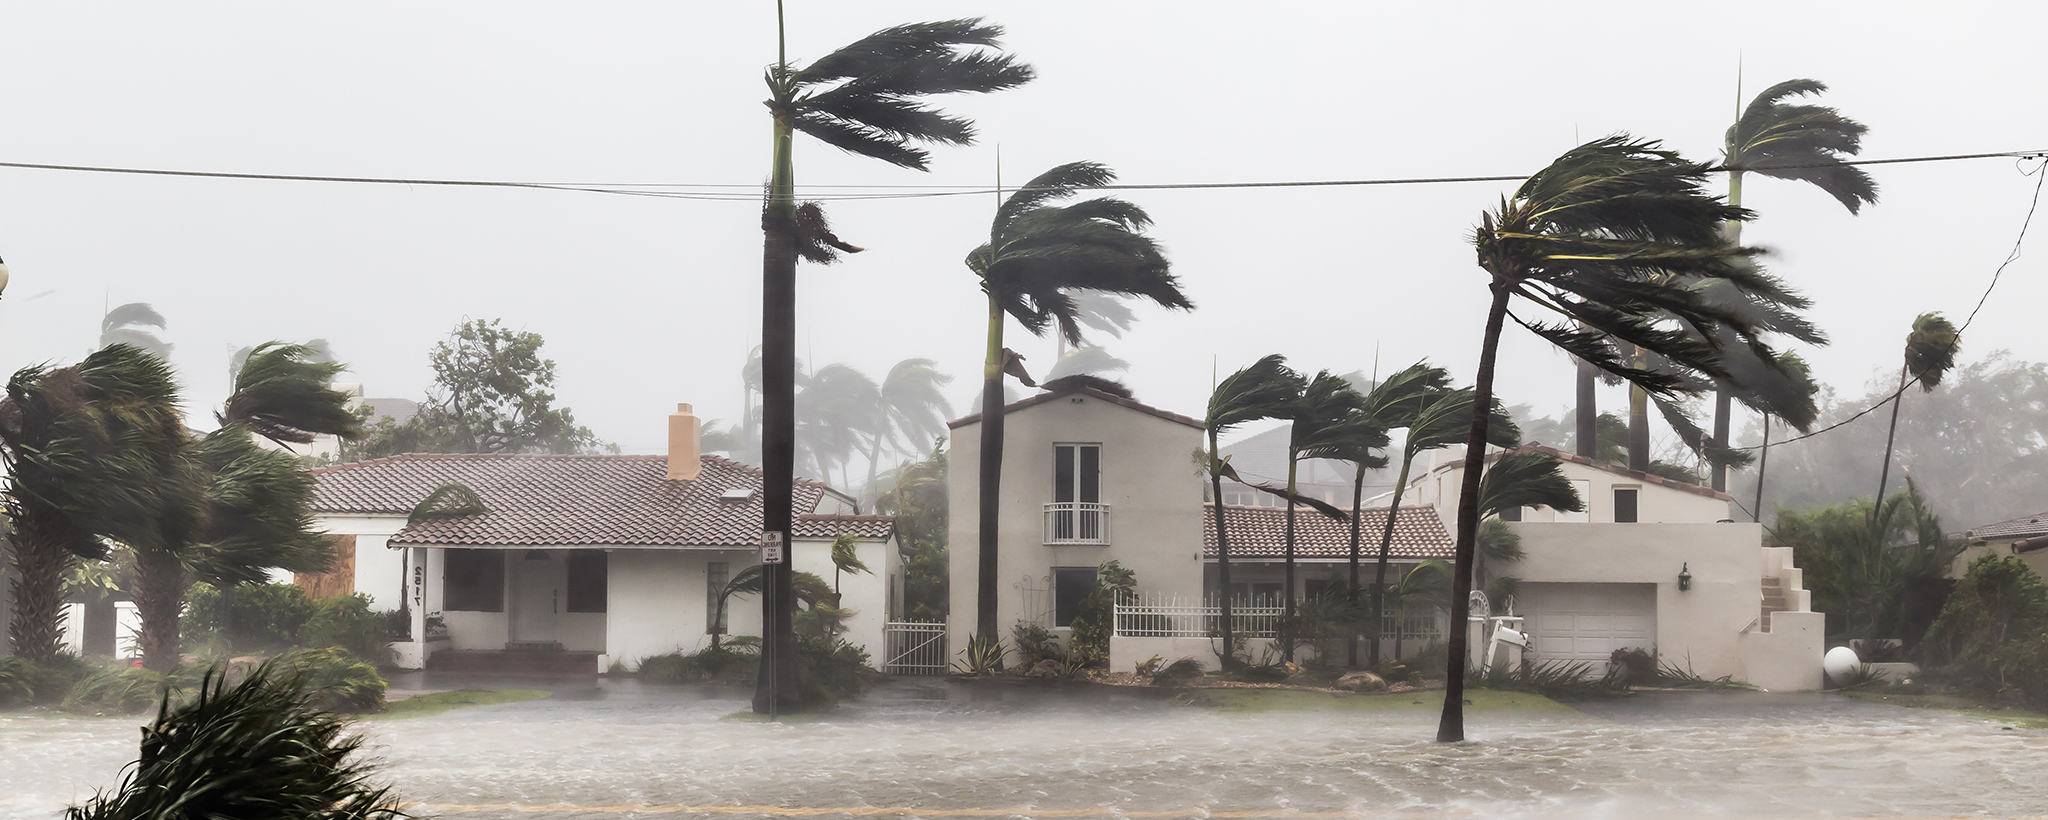 A home is shown, as heavy rain falls and high winds blow palm trees strongly. 